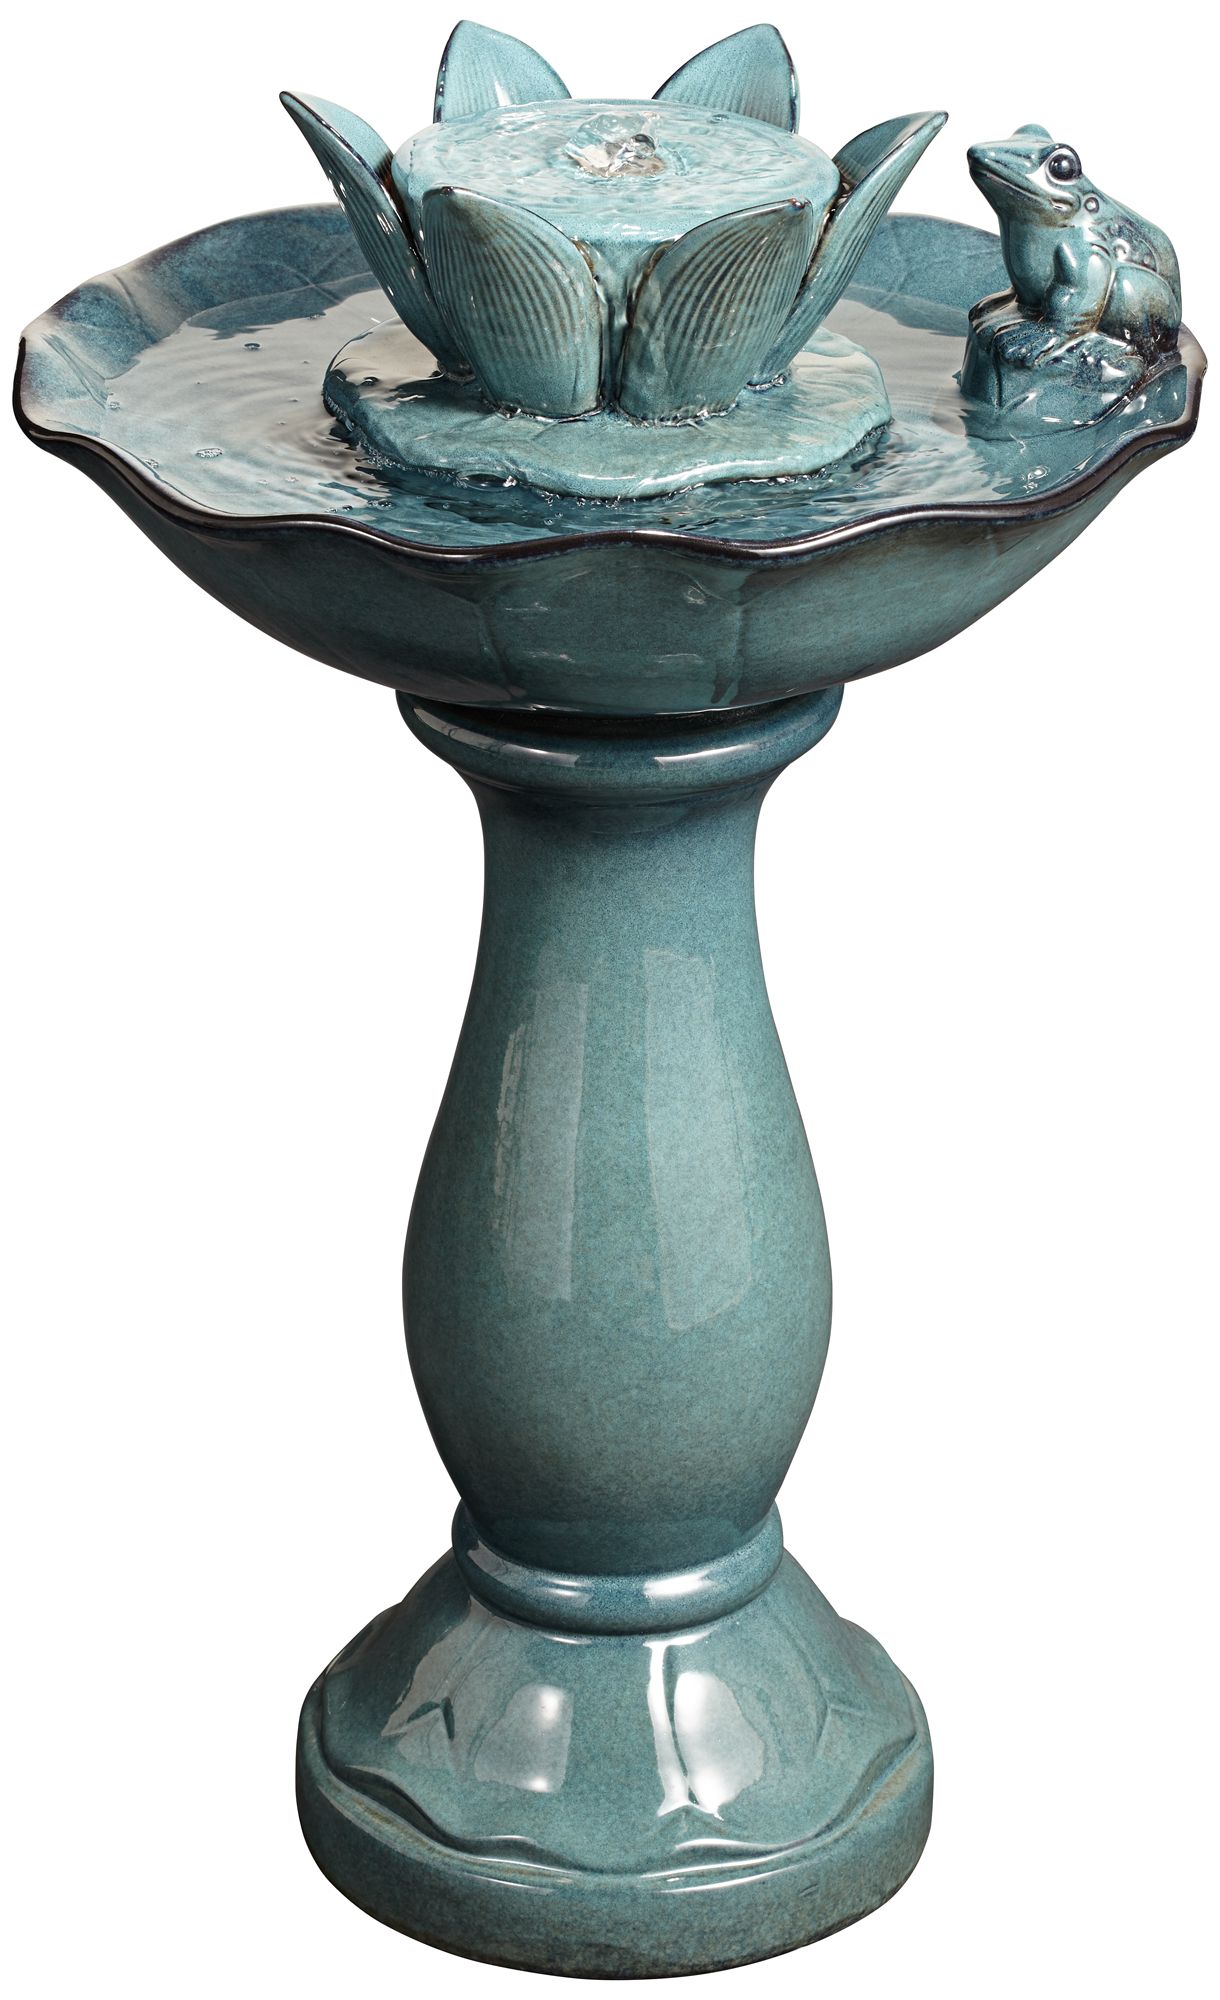 John Timberland Pleasant Pond Modern Bubbler Lotus Flower Outdoor Floor Water Fountain 25 1/4" for Yard Garden Patio Deck Porch House Exterior - image 2 of 9